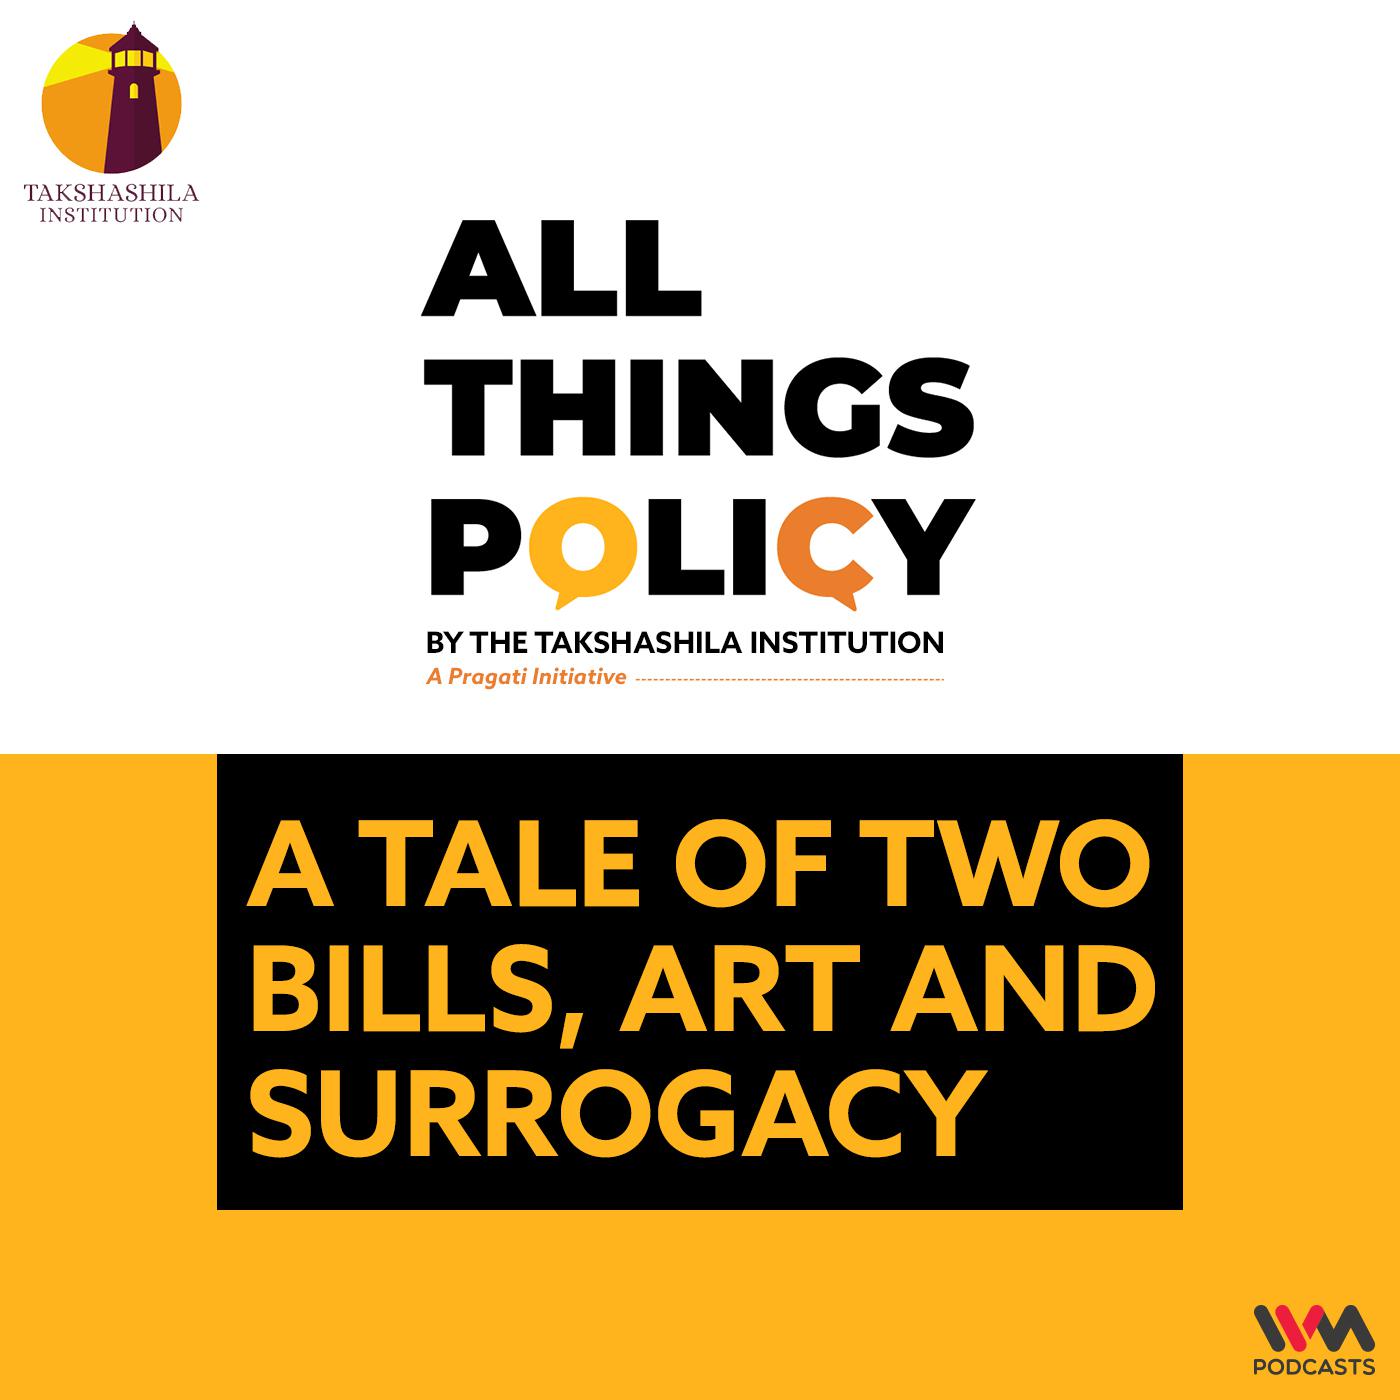 A Tale of two Bills, ART and Surrogacy